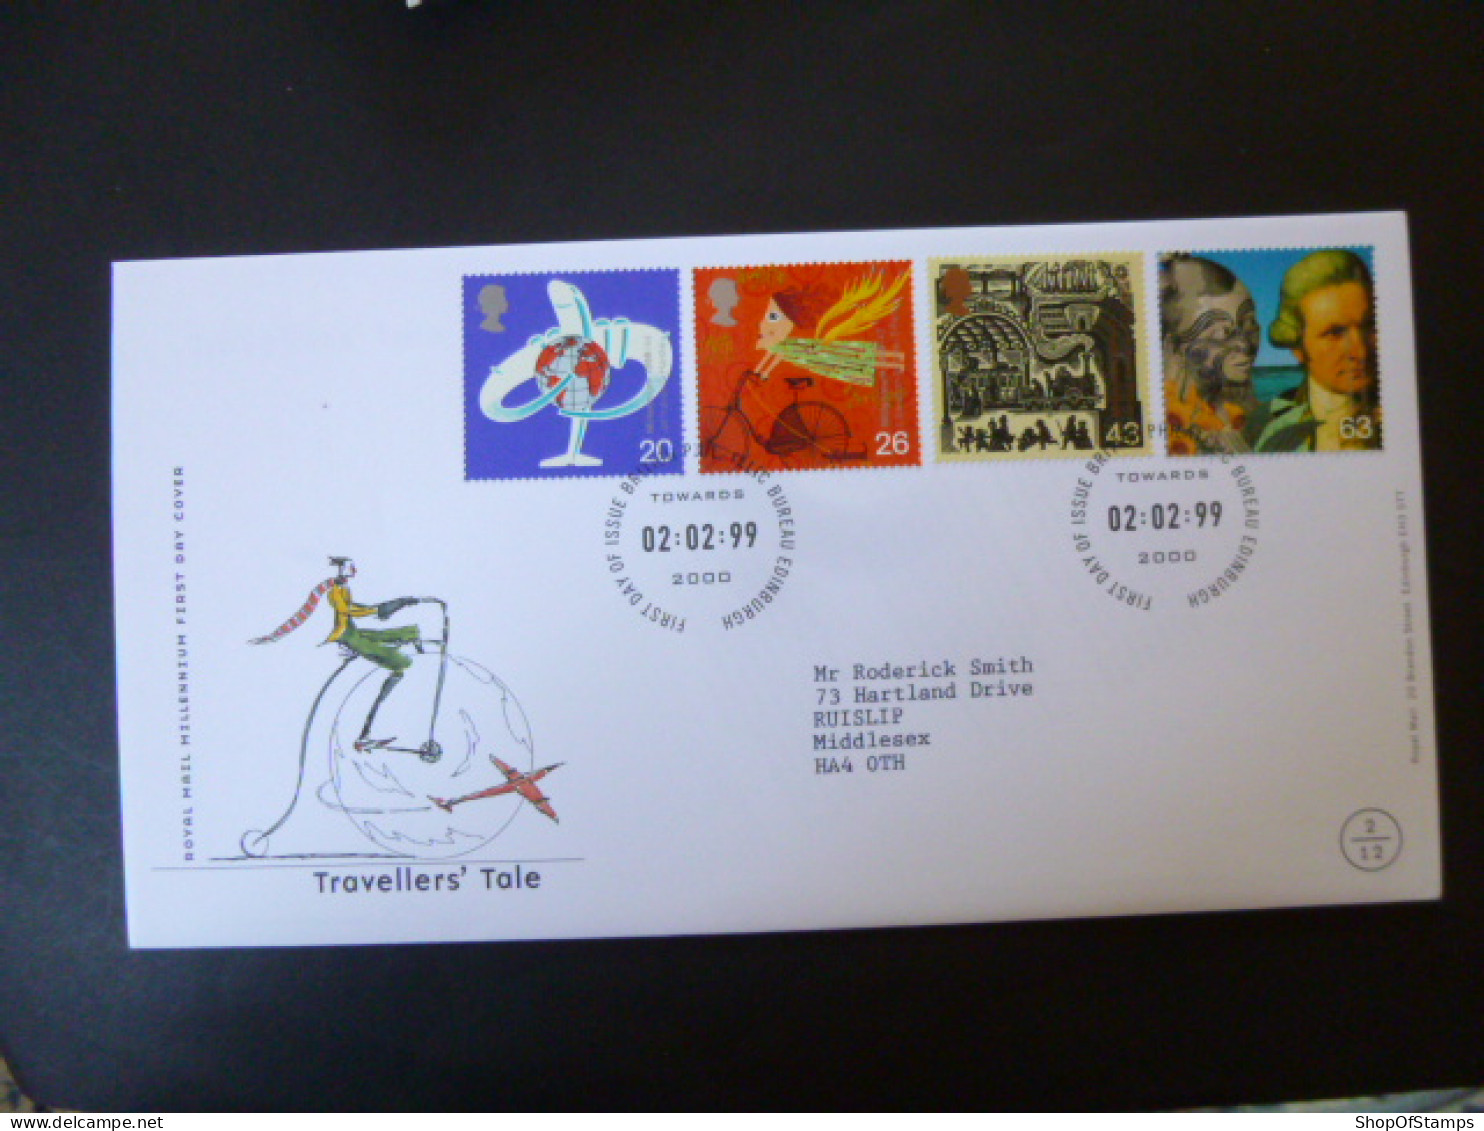 GREAT BRITAIN SG 2073-76 MILLENIUM TALES THE TRAVELLERS TALE FDC EDINBURGH - Unclassified